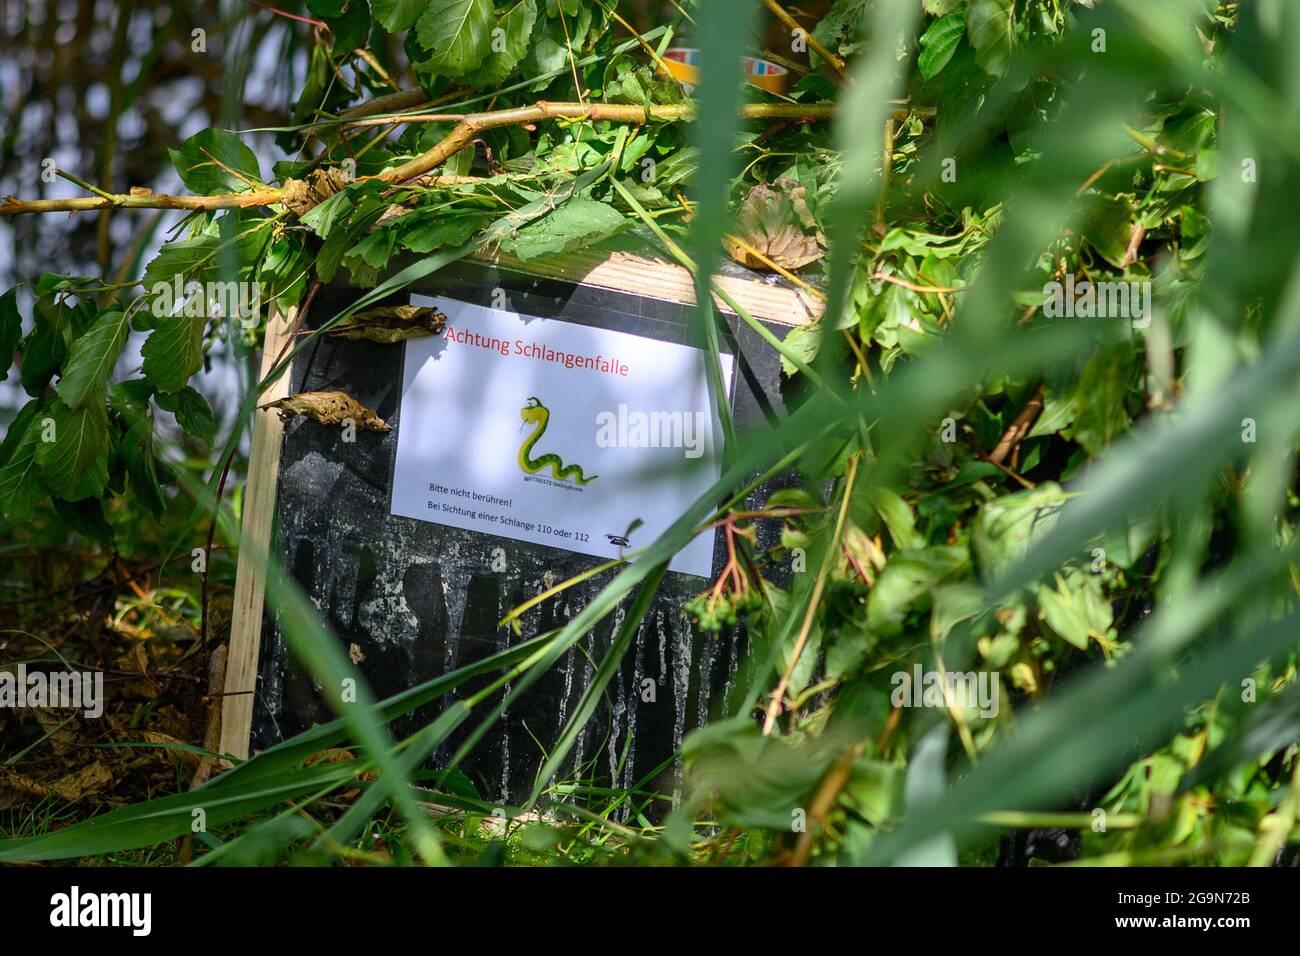 Haldensleben, Germany. 27th July, 2021. A box with the inscription  "Attention snake trap" and "Please do not touch! If you see a snake, call  110 or 112" stands in the reeds. The